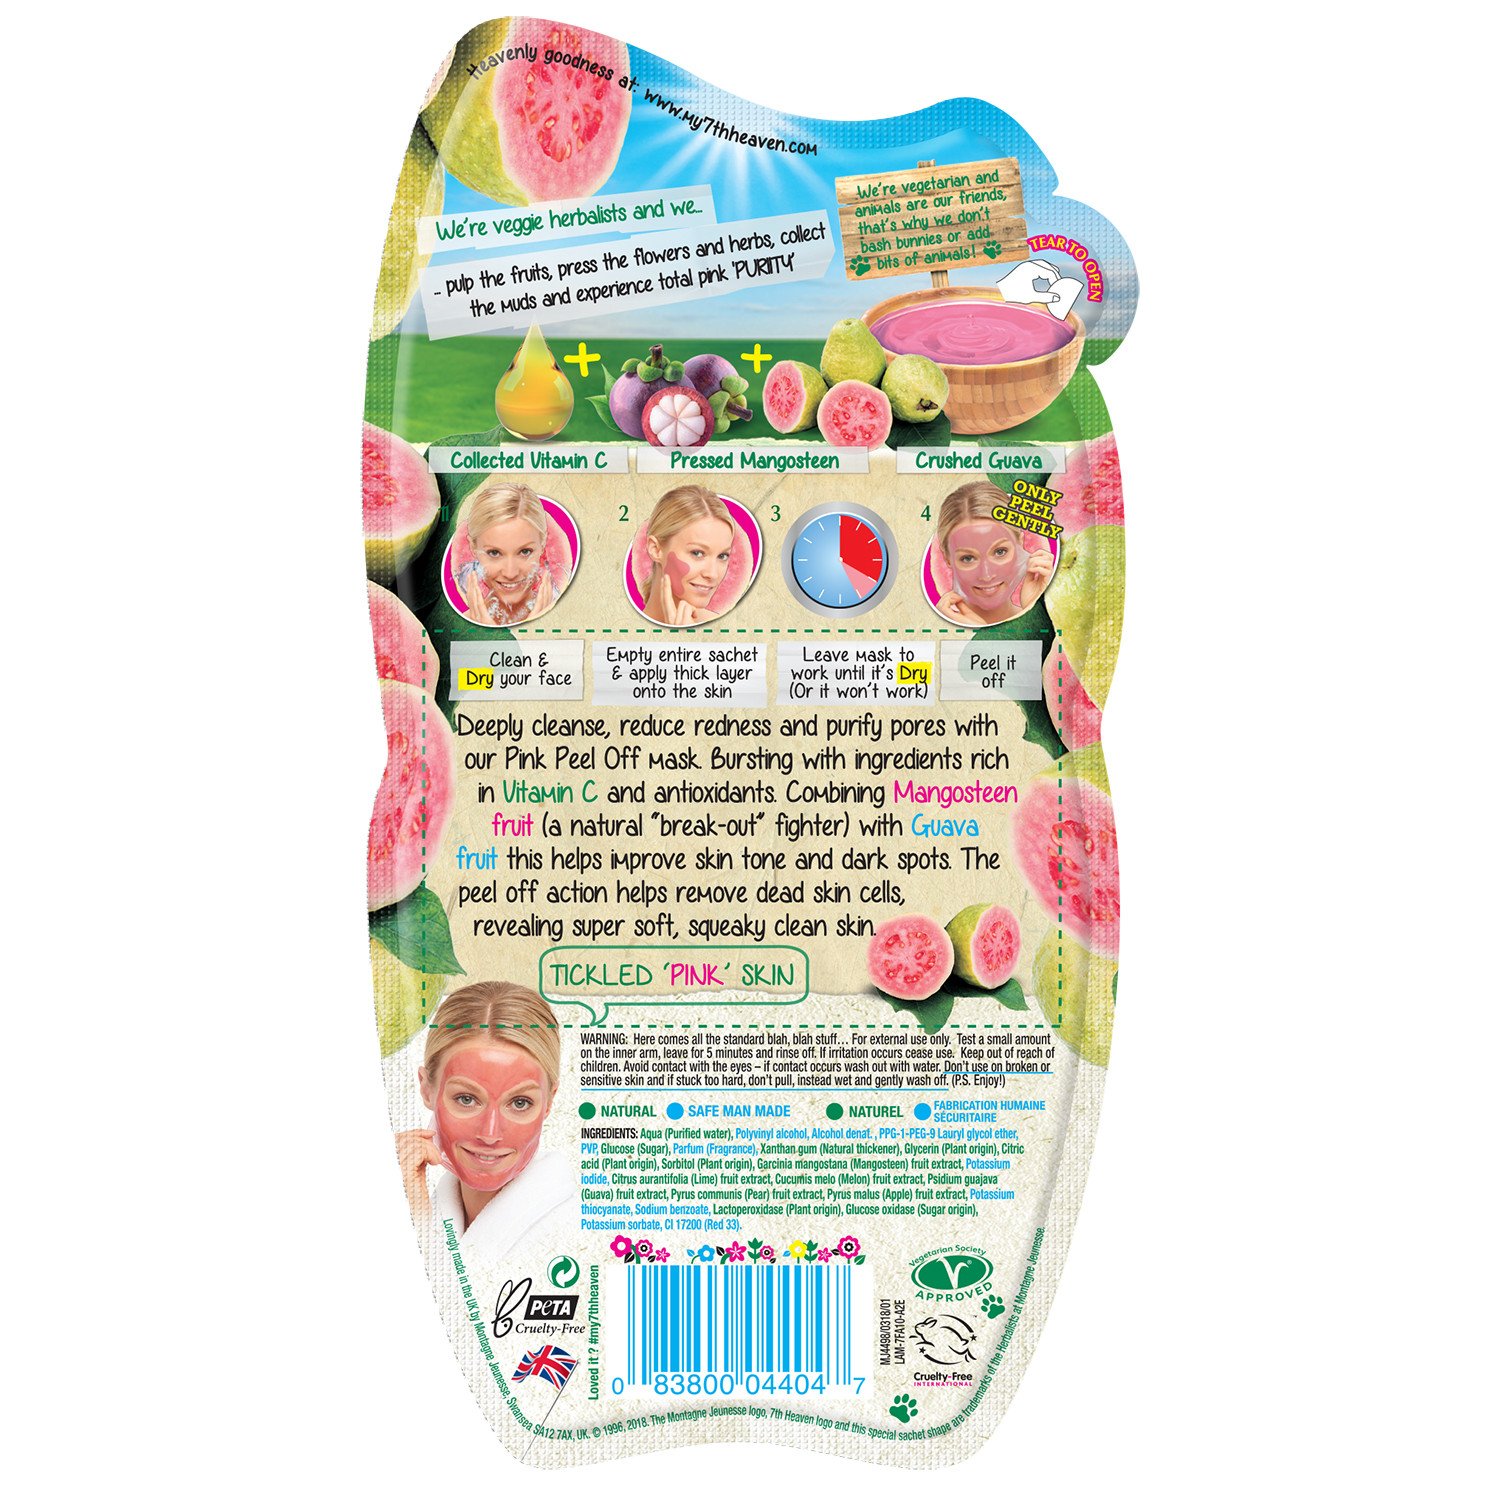 7th Heaven Pink Guava Peel-Off Purify and Refine Pores Face Mask Image 2